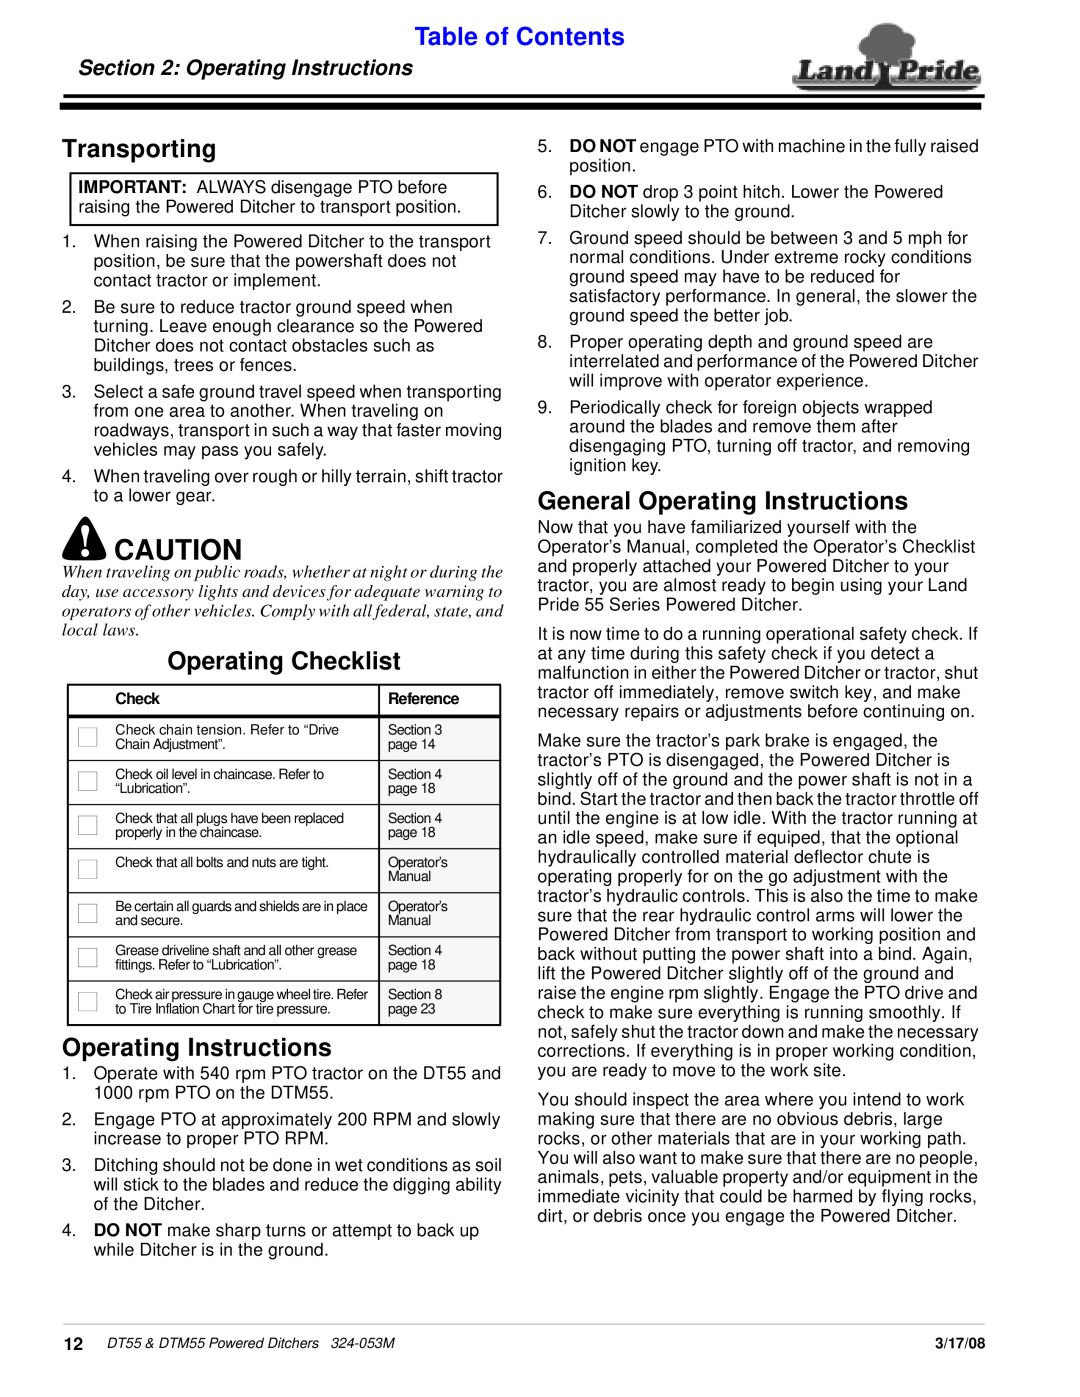 Land Pride Powered Ditchers, DT55 Transporting, Operating Checklist, General Operating Instructions, Table of Contents 